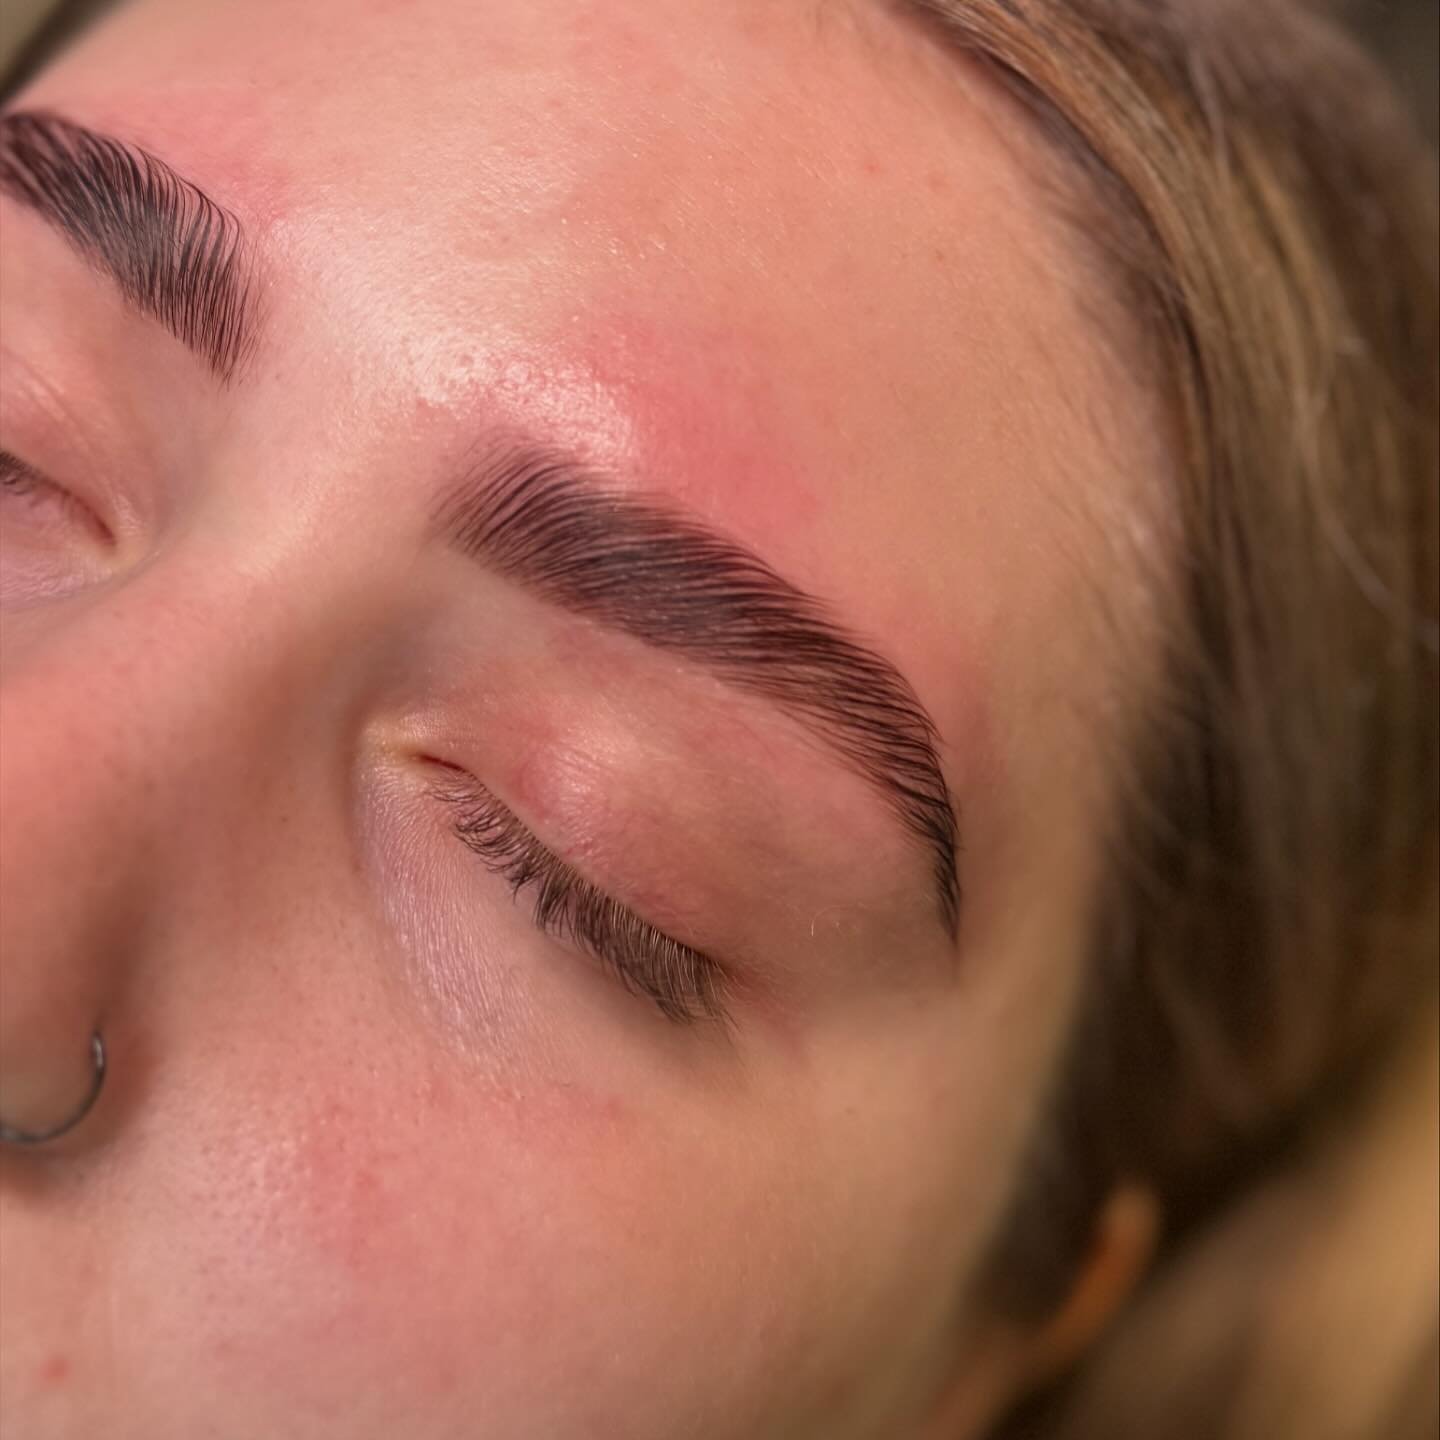 🚀Say Goodbye to unruly brows, and say Hello to defined perfection 😍
Why choose us? 
1. With three years of perfecting brows, we take our time to make sure you love your brows. Each appointment includes mapping, custom color matching, and wax.
2. We